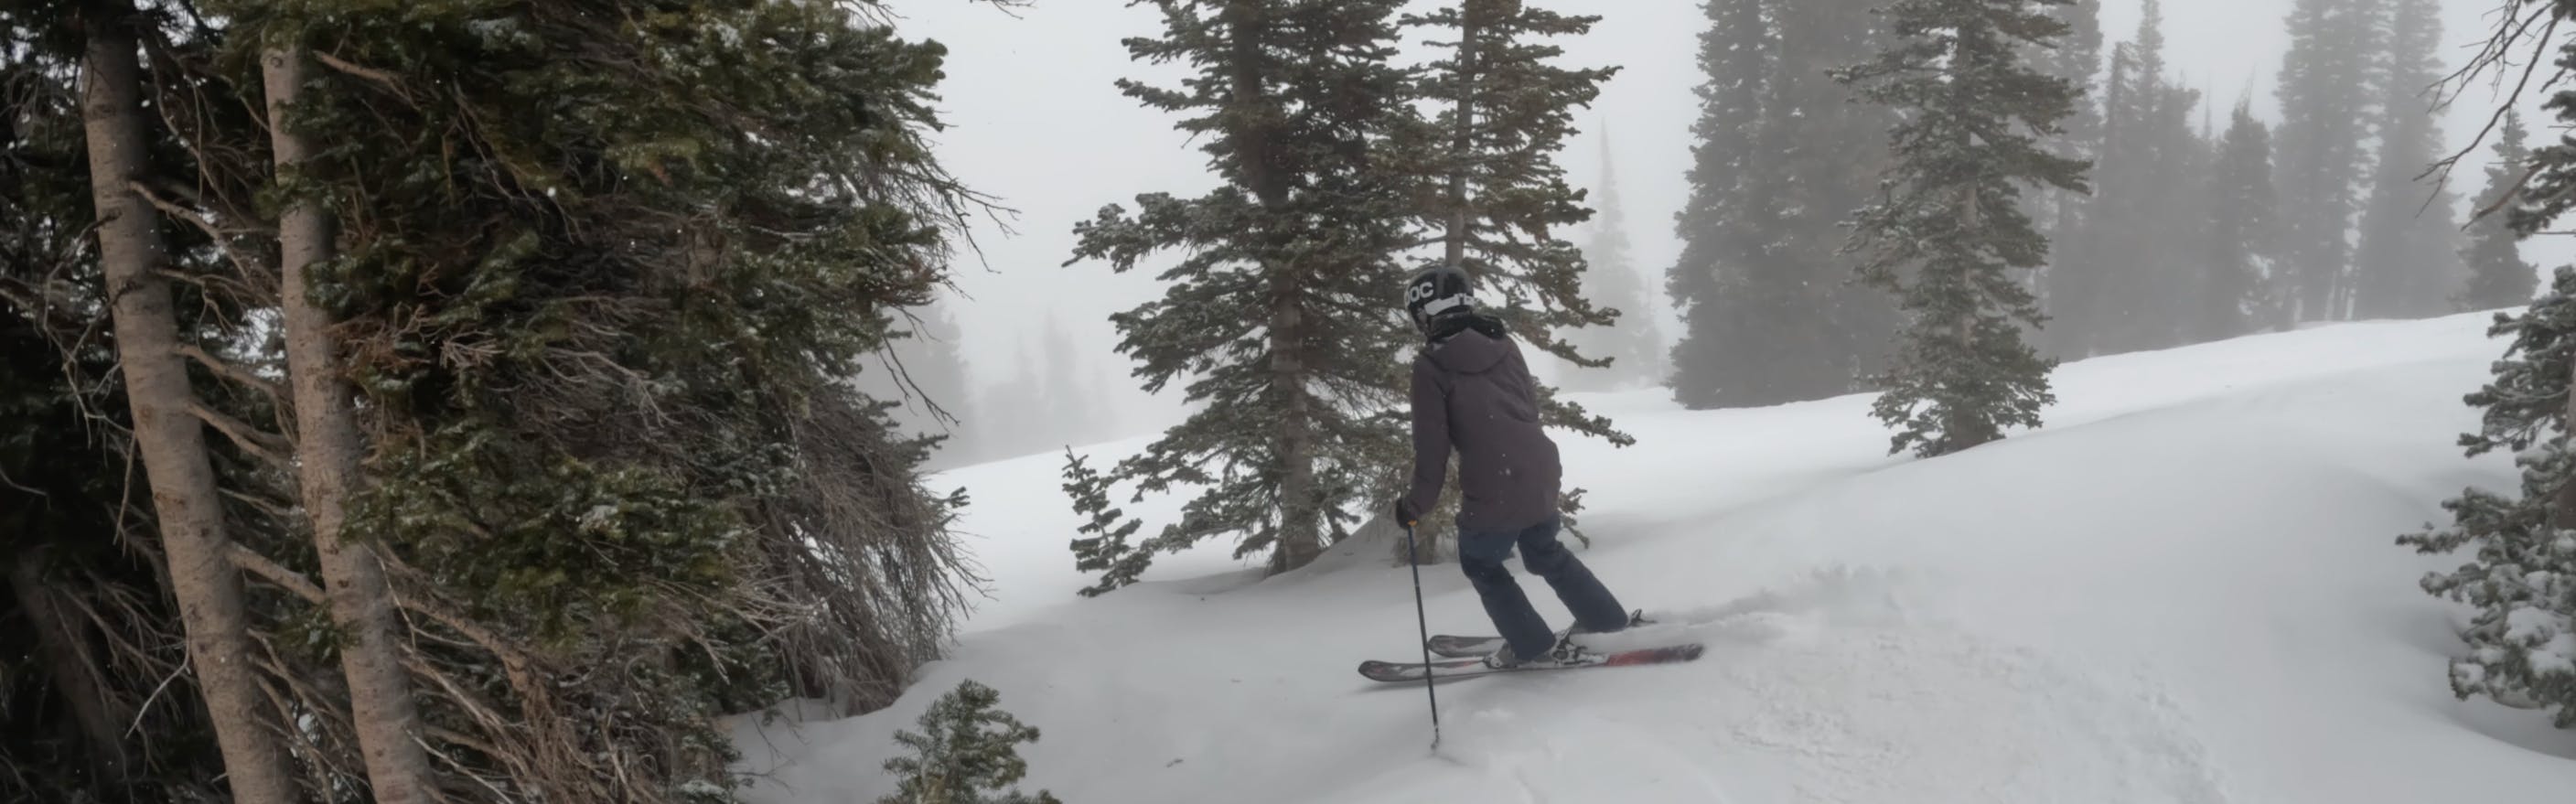 Curated Ski Expert Jessica Whittam skiing the 2023 Atomic Maven 86 skis in the trees in foggy conditions